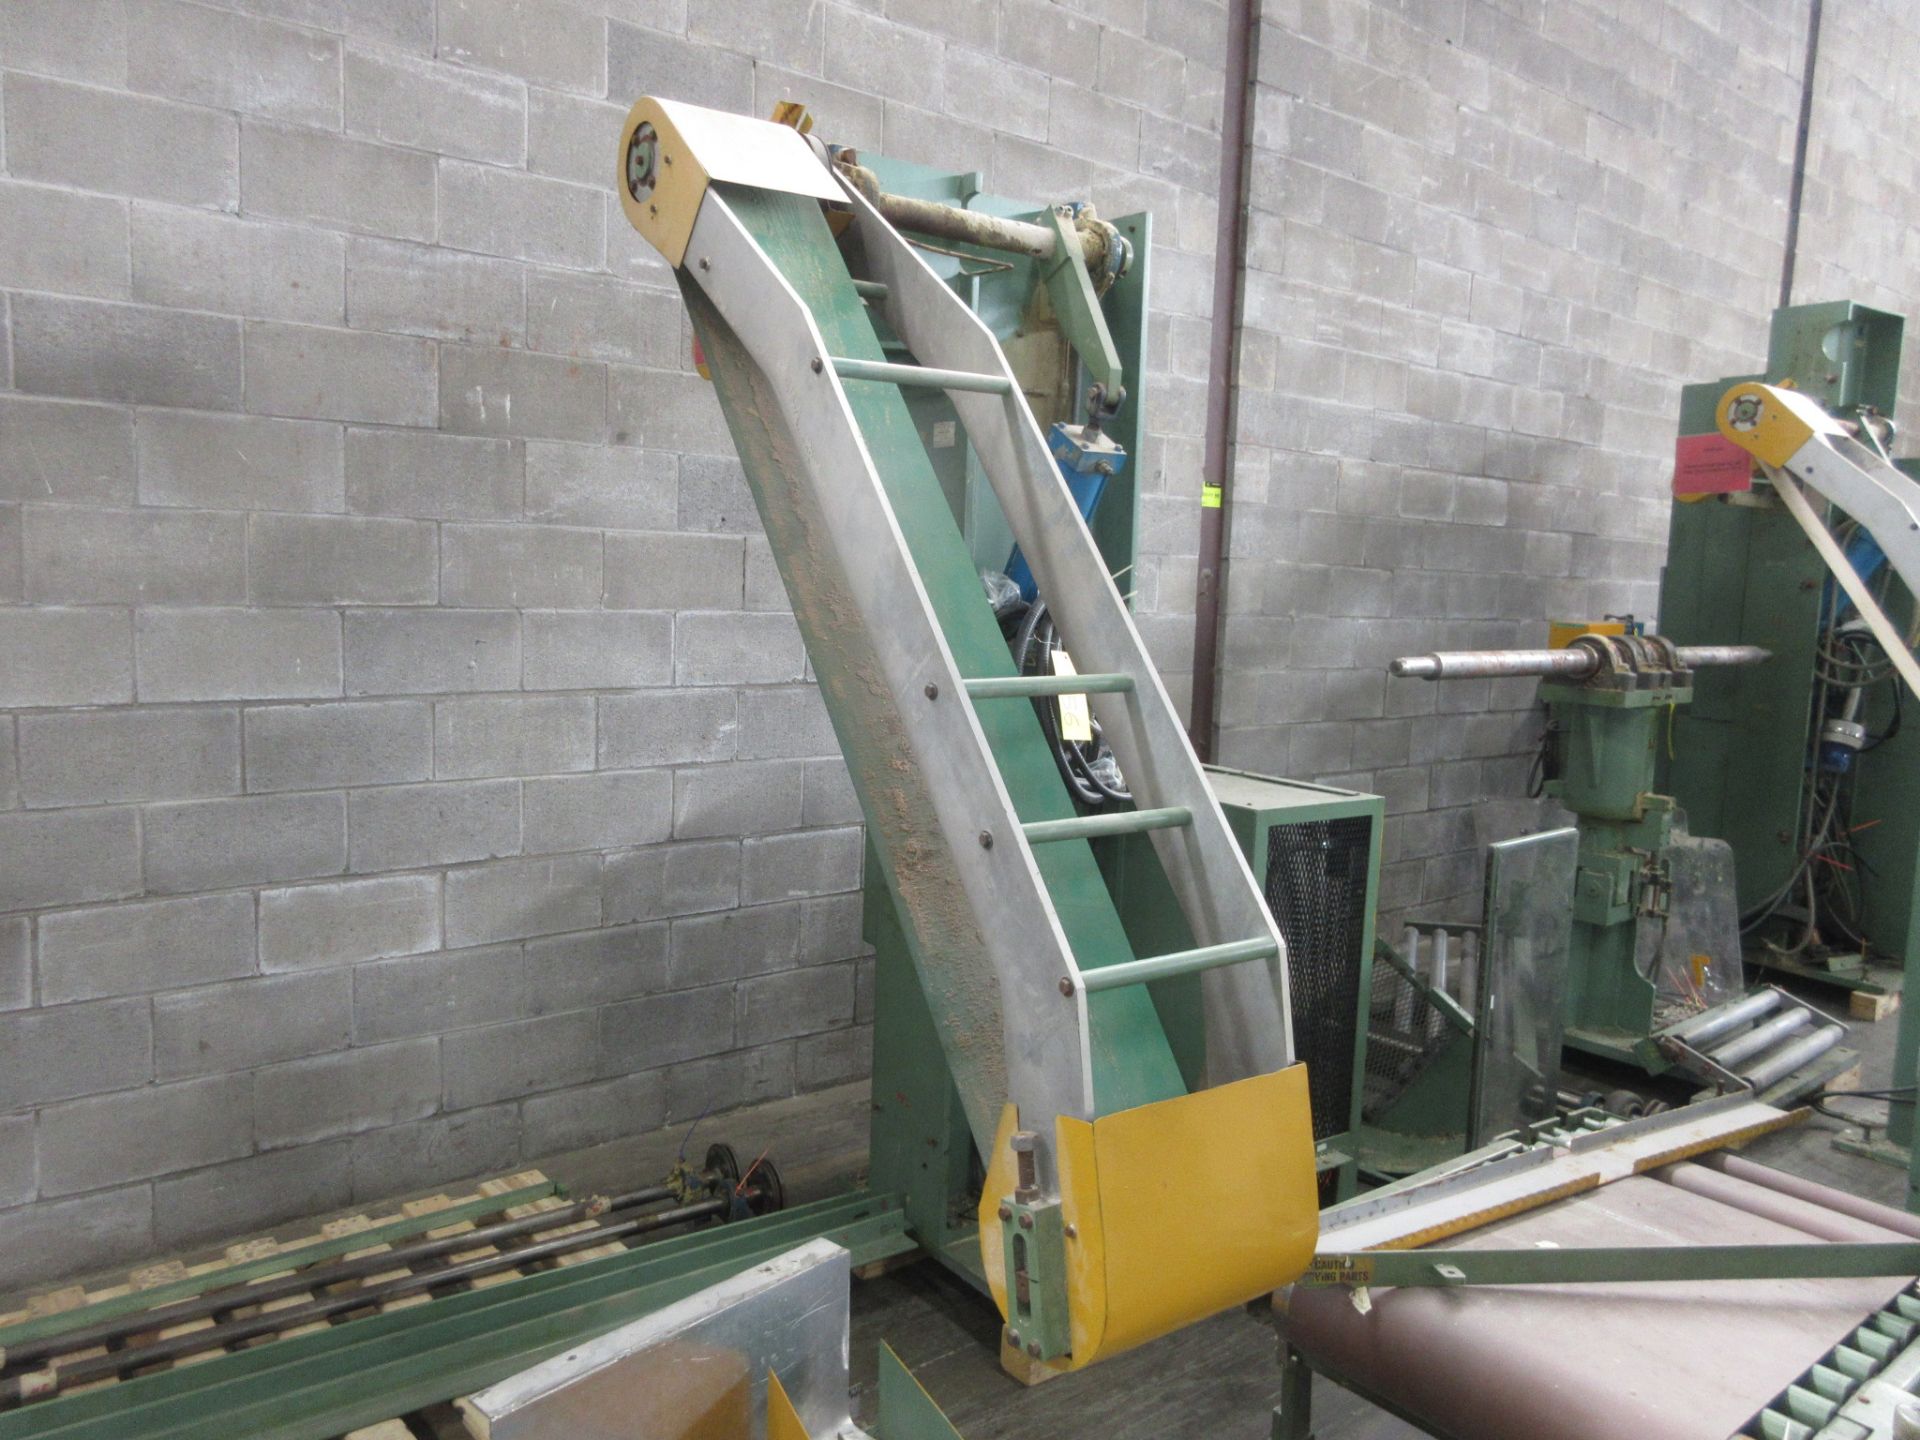 LOT OF (2) BRETTING HEAVY DUTY DRIVEN UNWIND STANDS, S/N 4539-91 (NORTHEAST WAREHOUSE) - Image 2 of 3